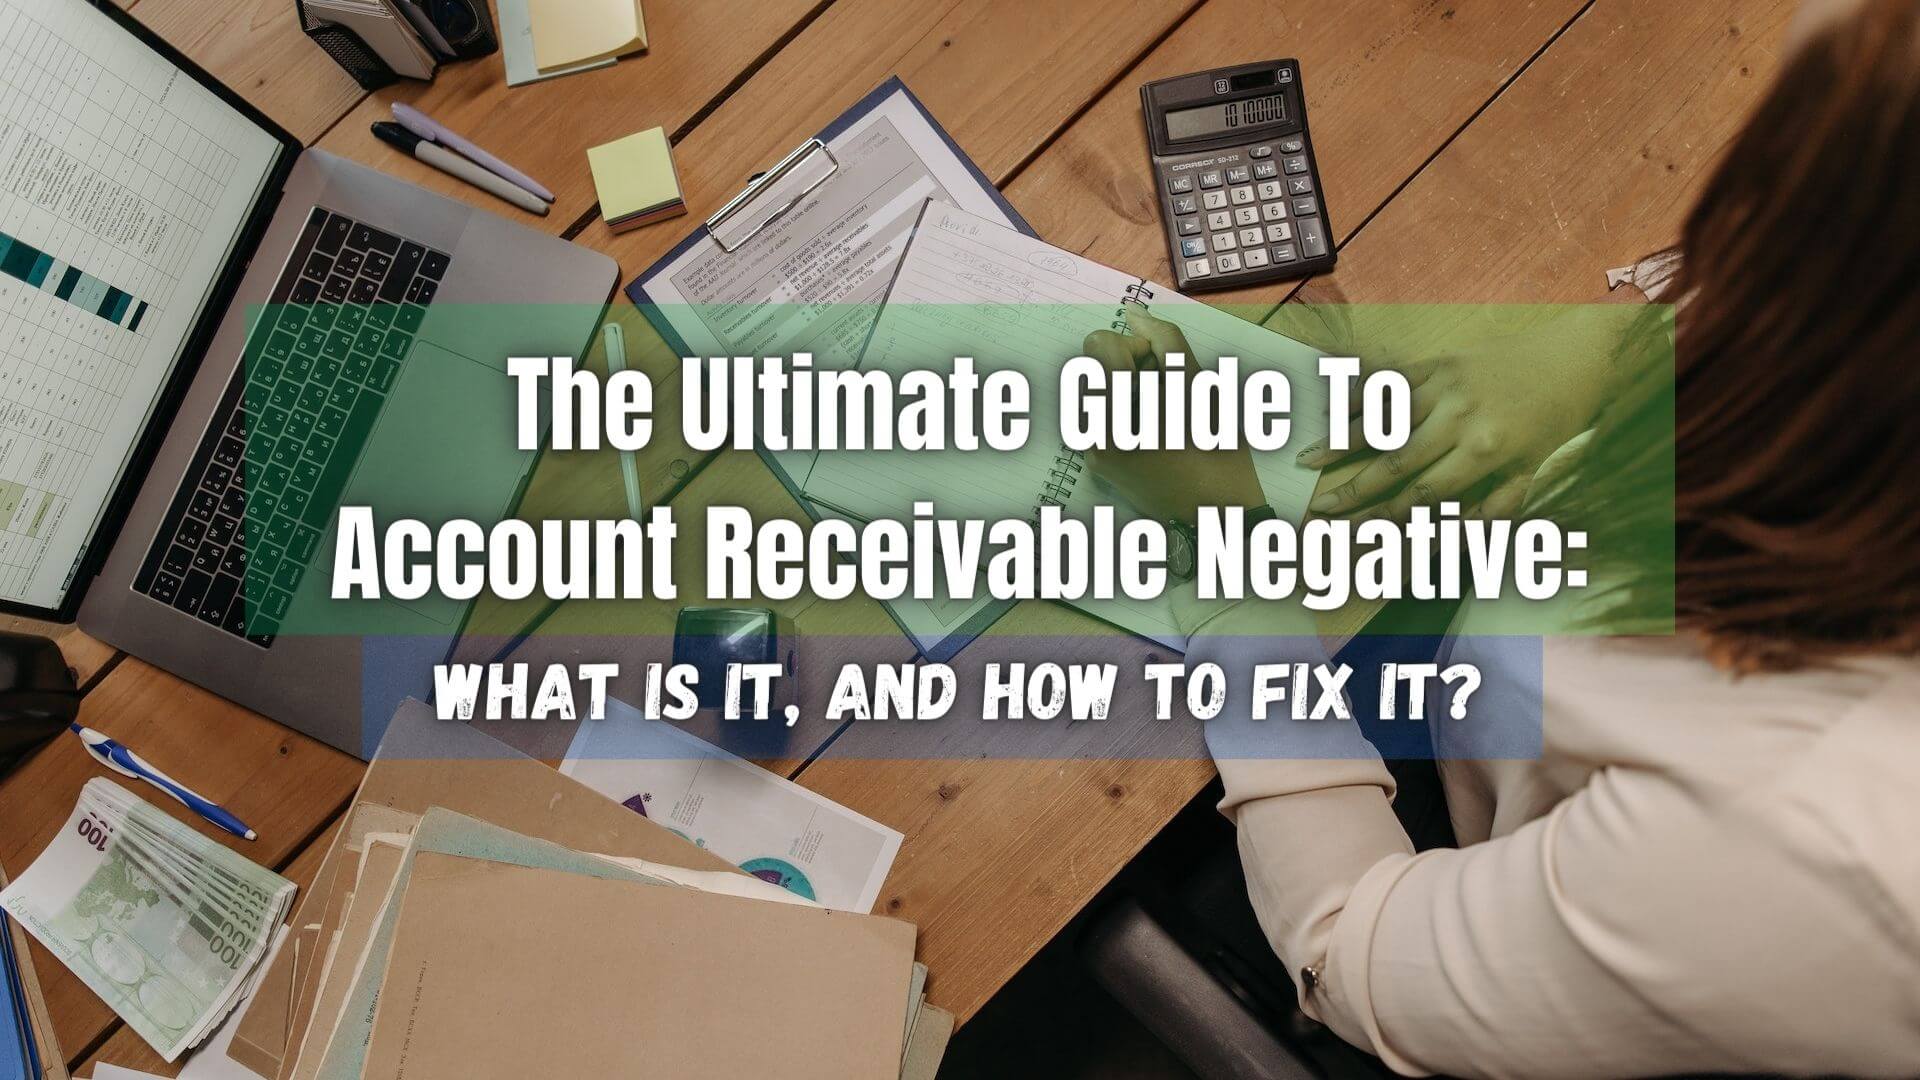 An account receivable negative can have serious implications for a business if not managed properly. Here's what it is and how to fix it.